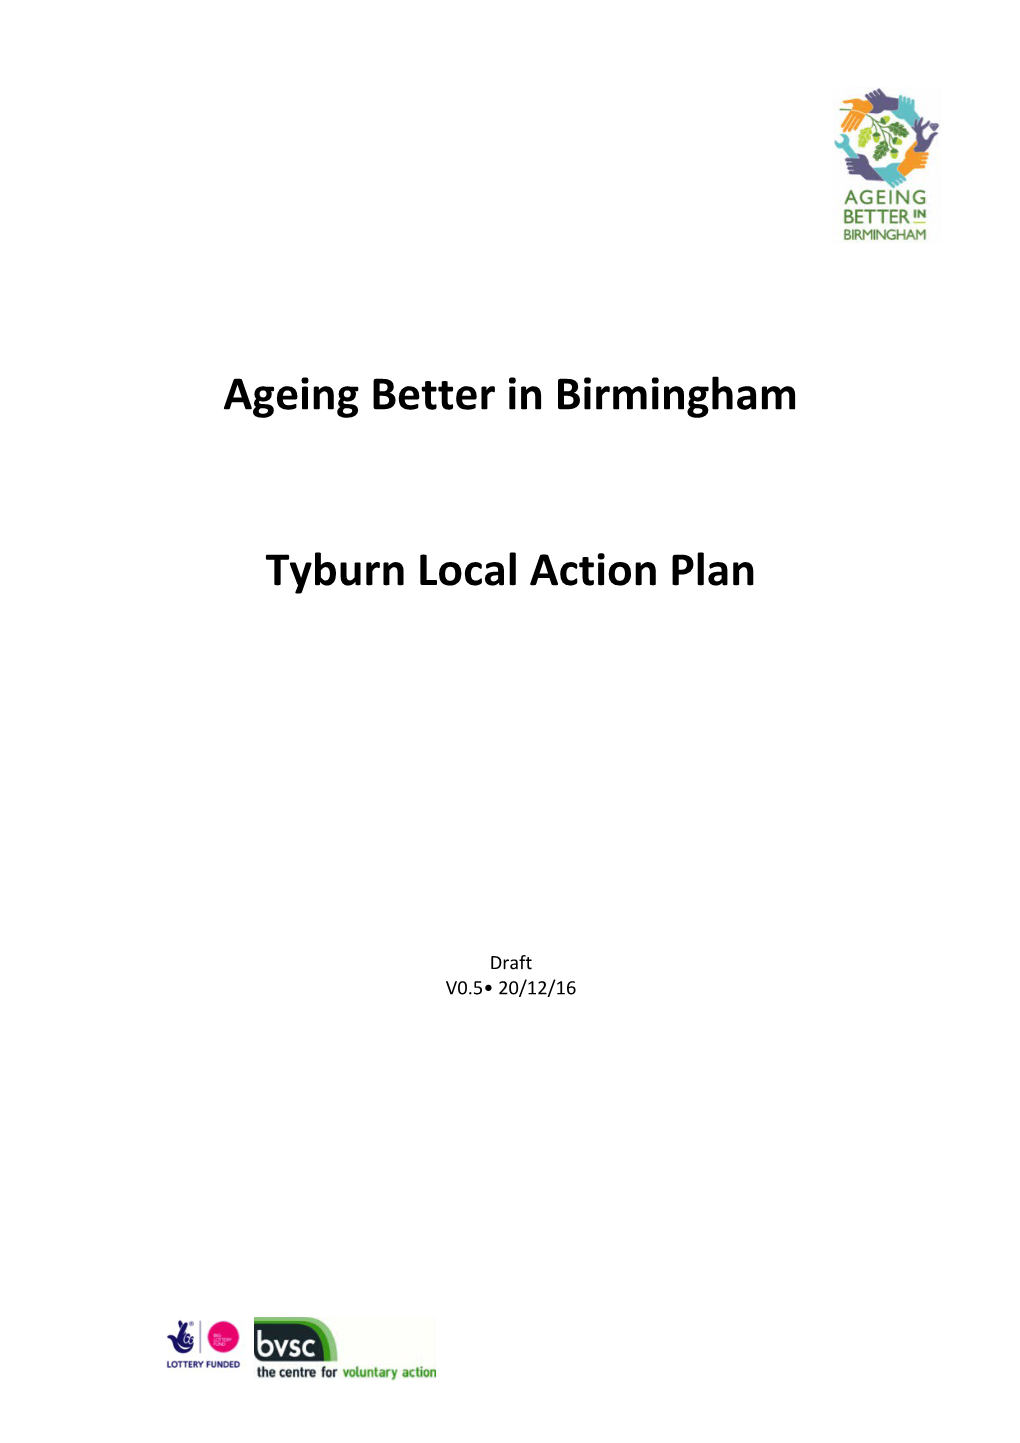 Tyburn Local Action Plan